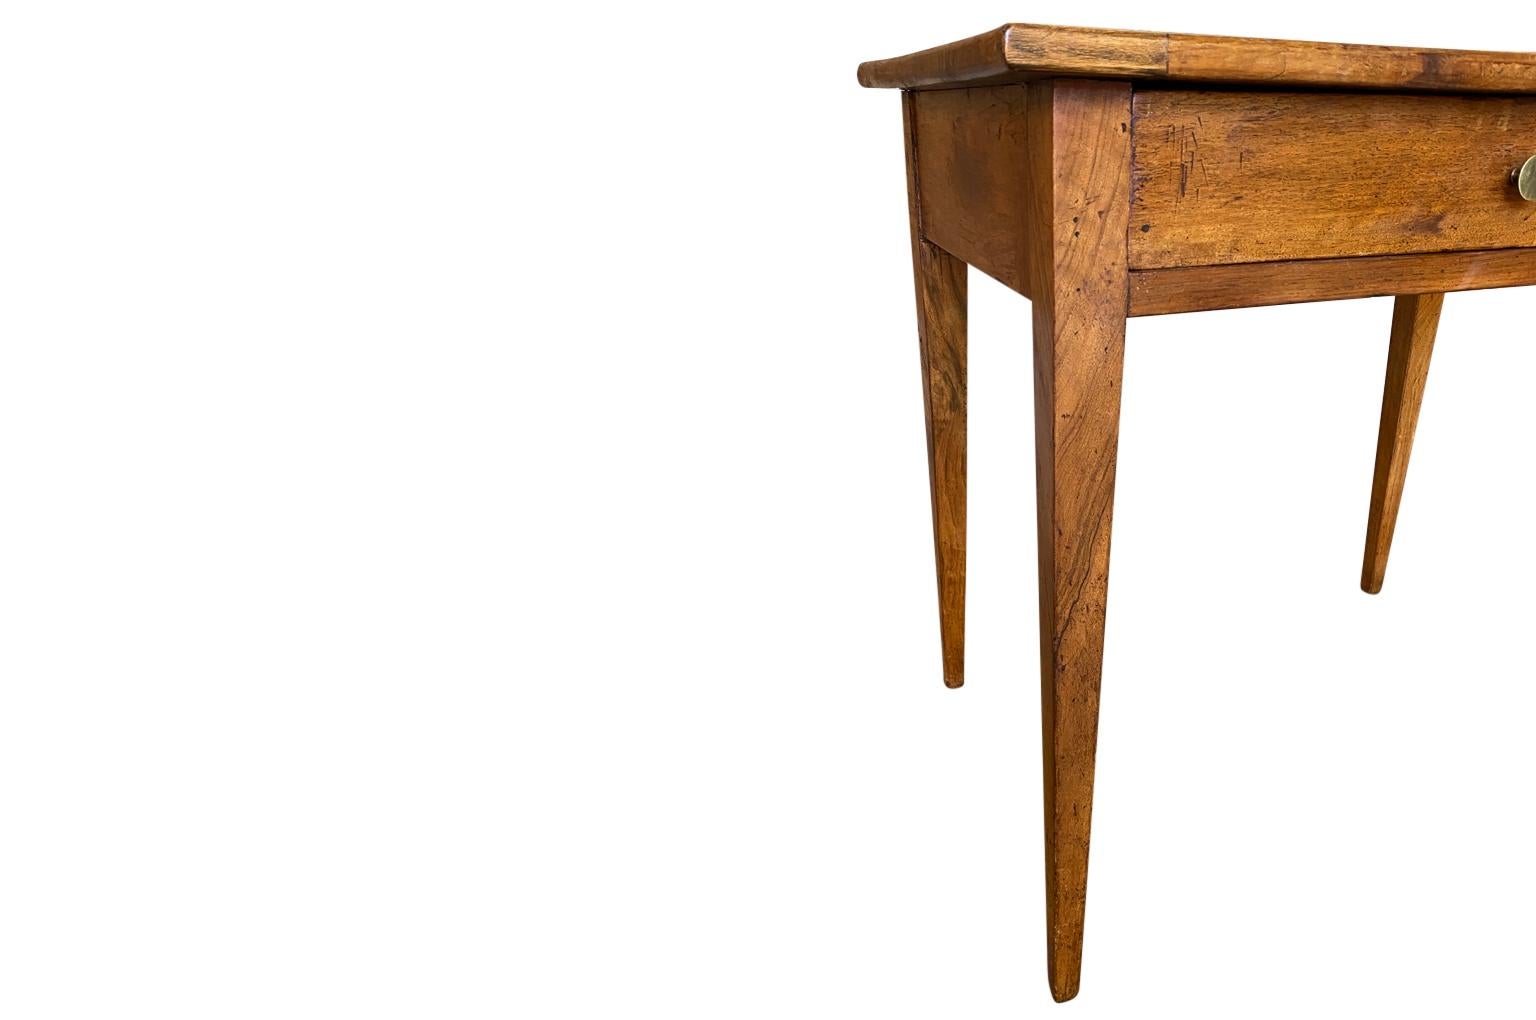 19th Century French Directoire Style Side Table